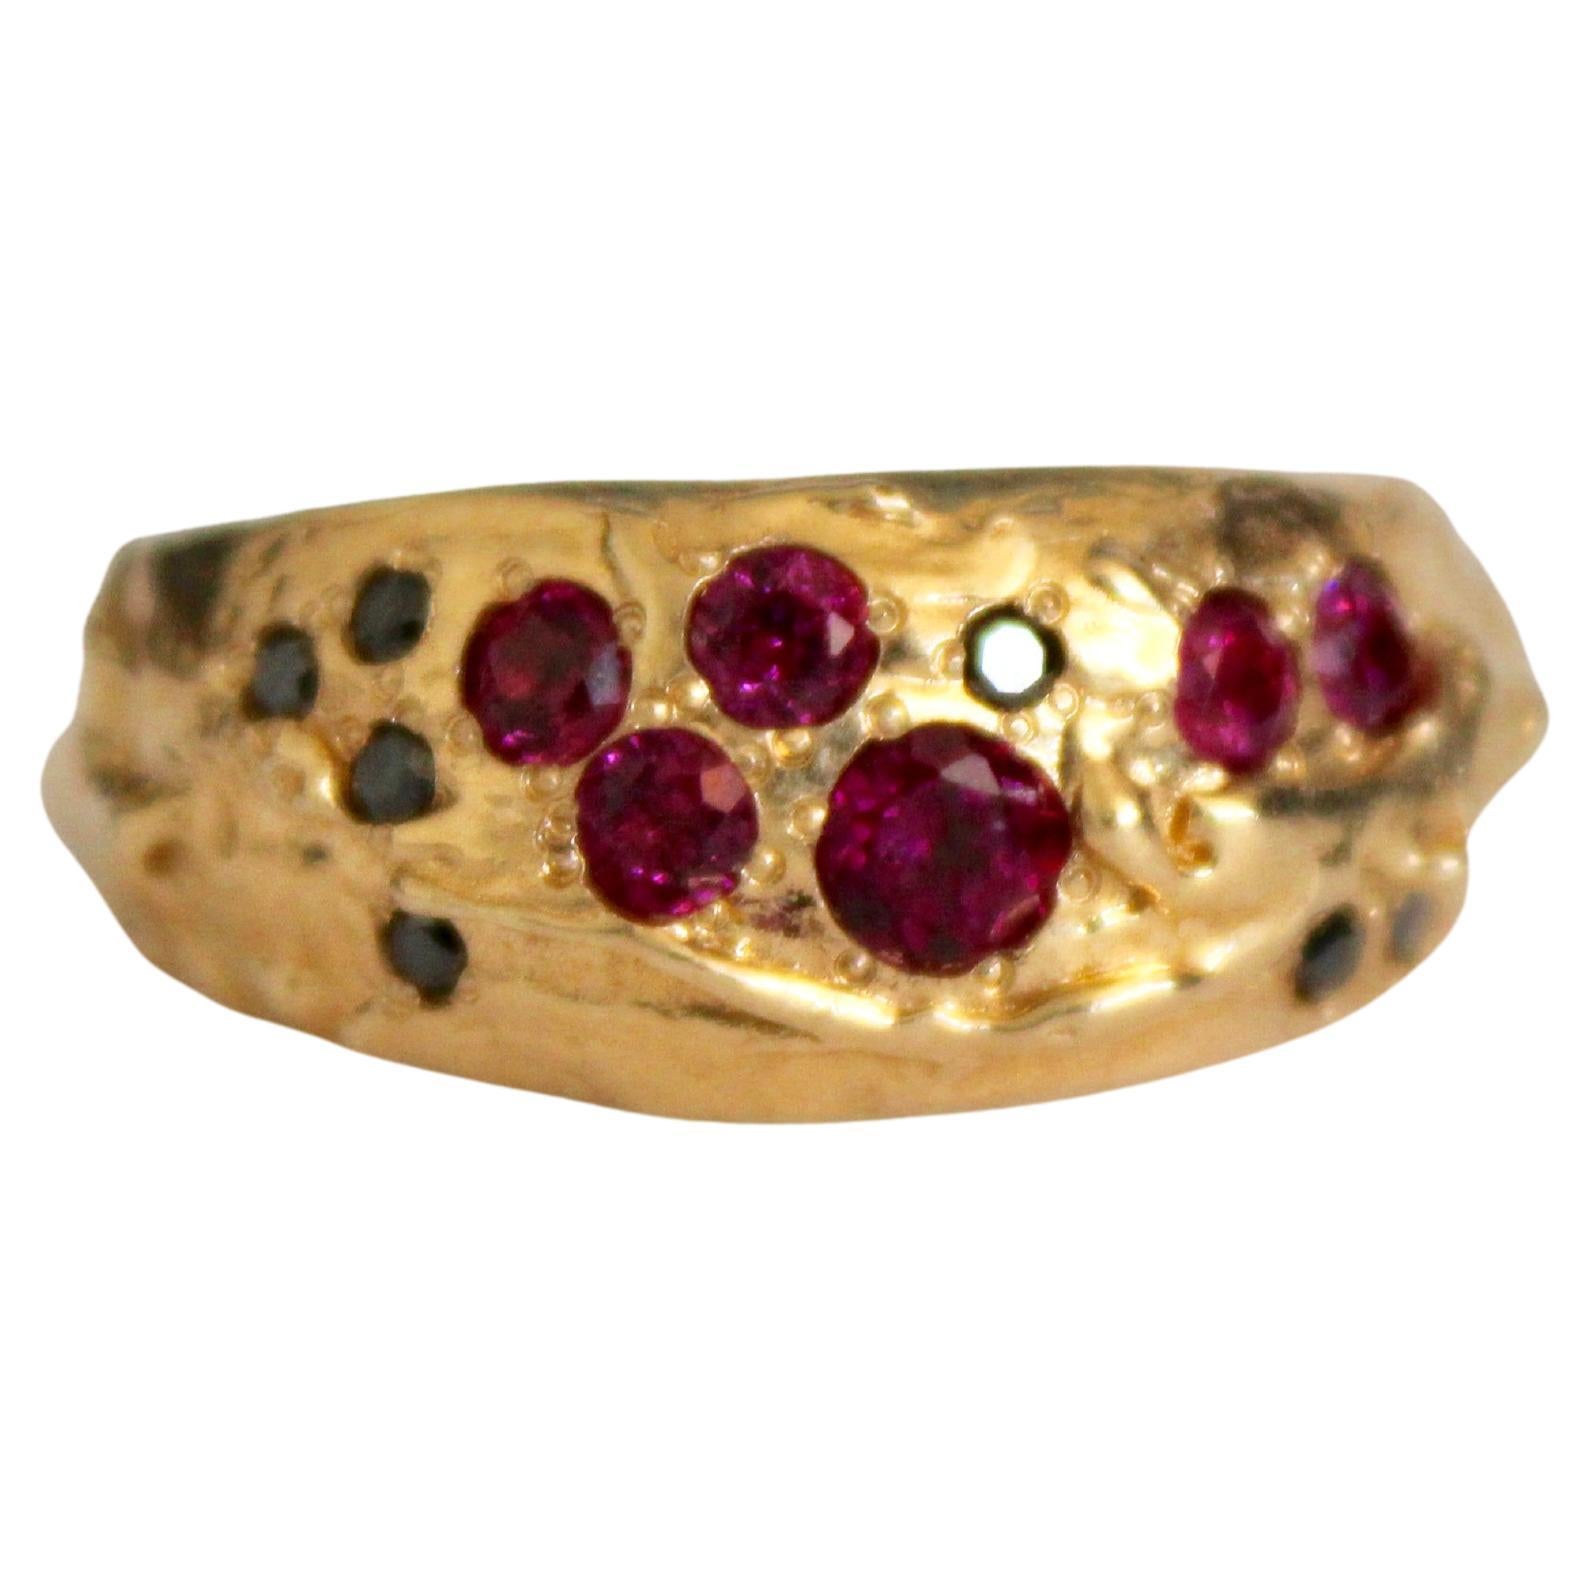 This unisex style is solid 14k yellow gold with pave set black diamonds and garnets. A unique and one of a kind ring, this piece tappers slightly to the back and raises slightly at the front the create a dome like shape. Textured throughout, with